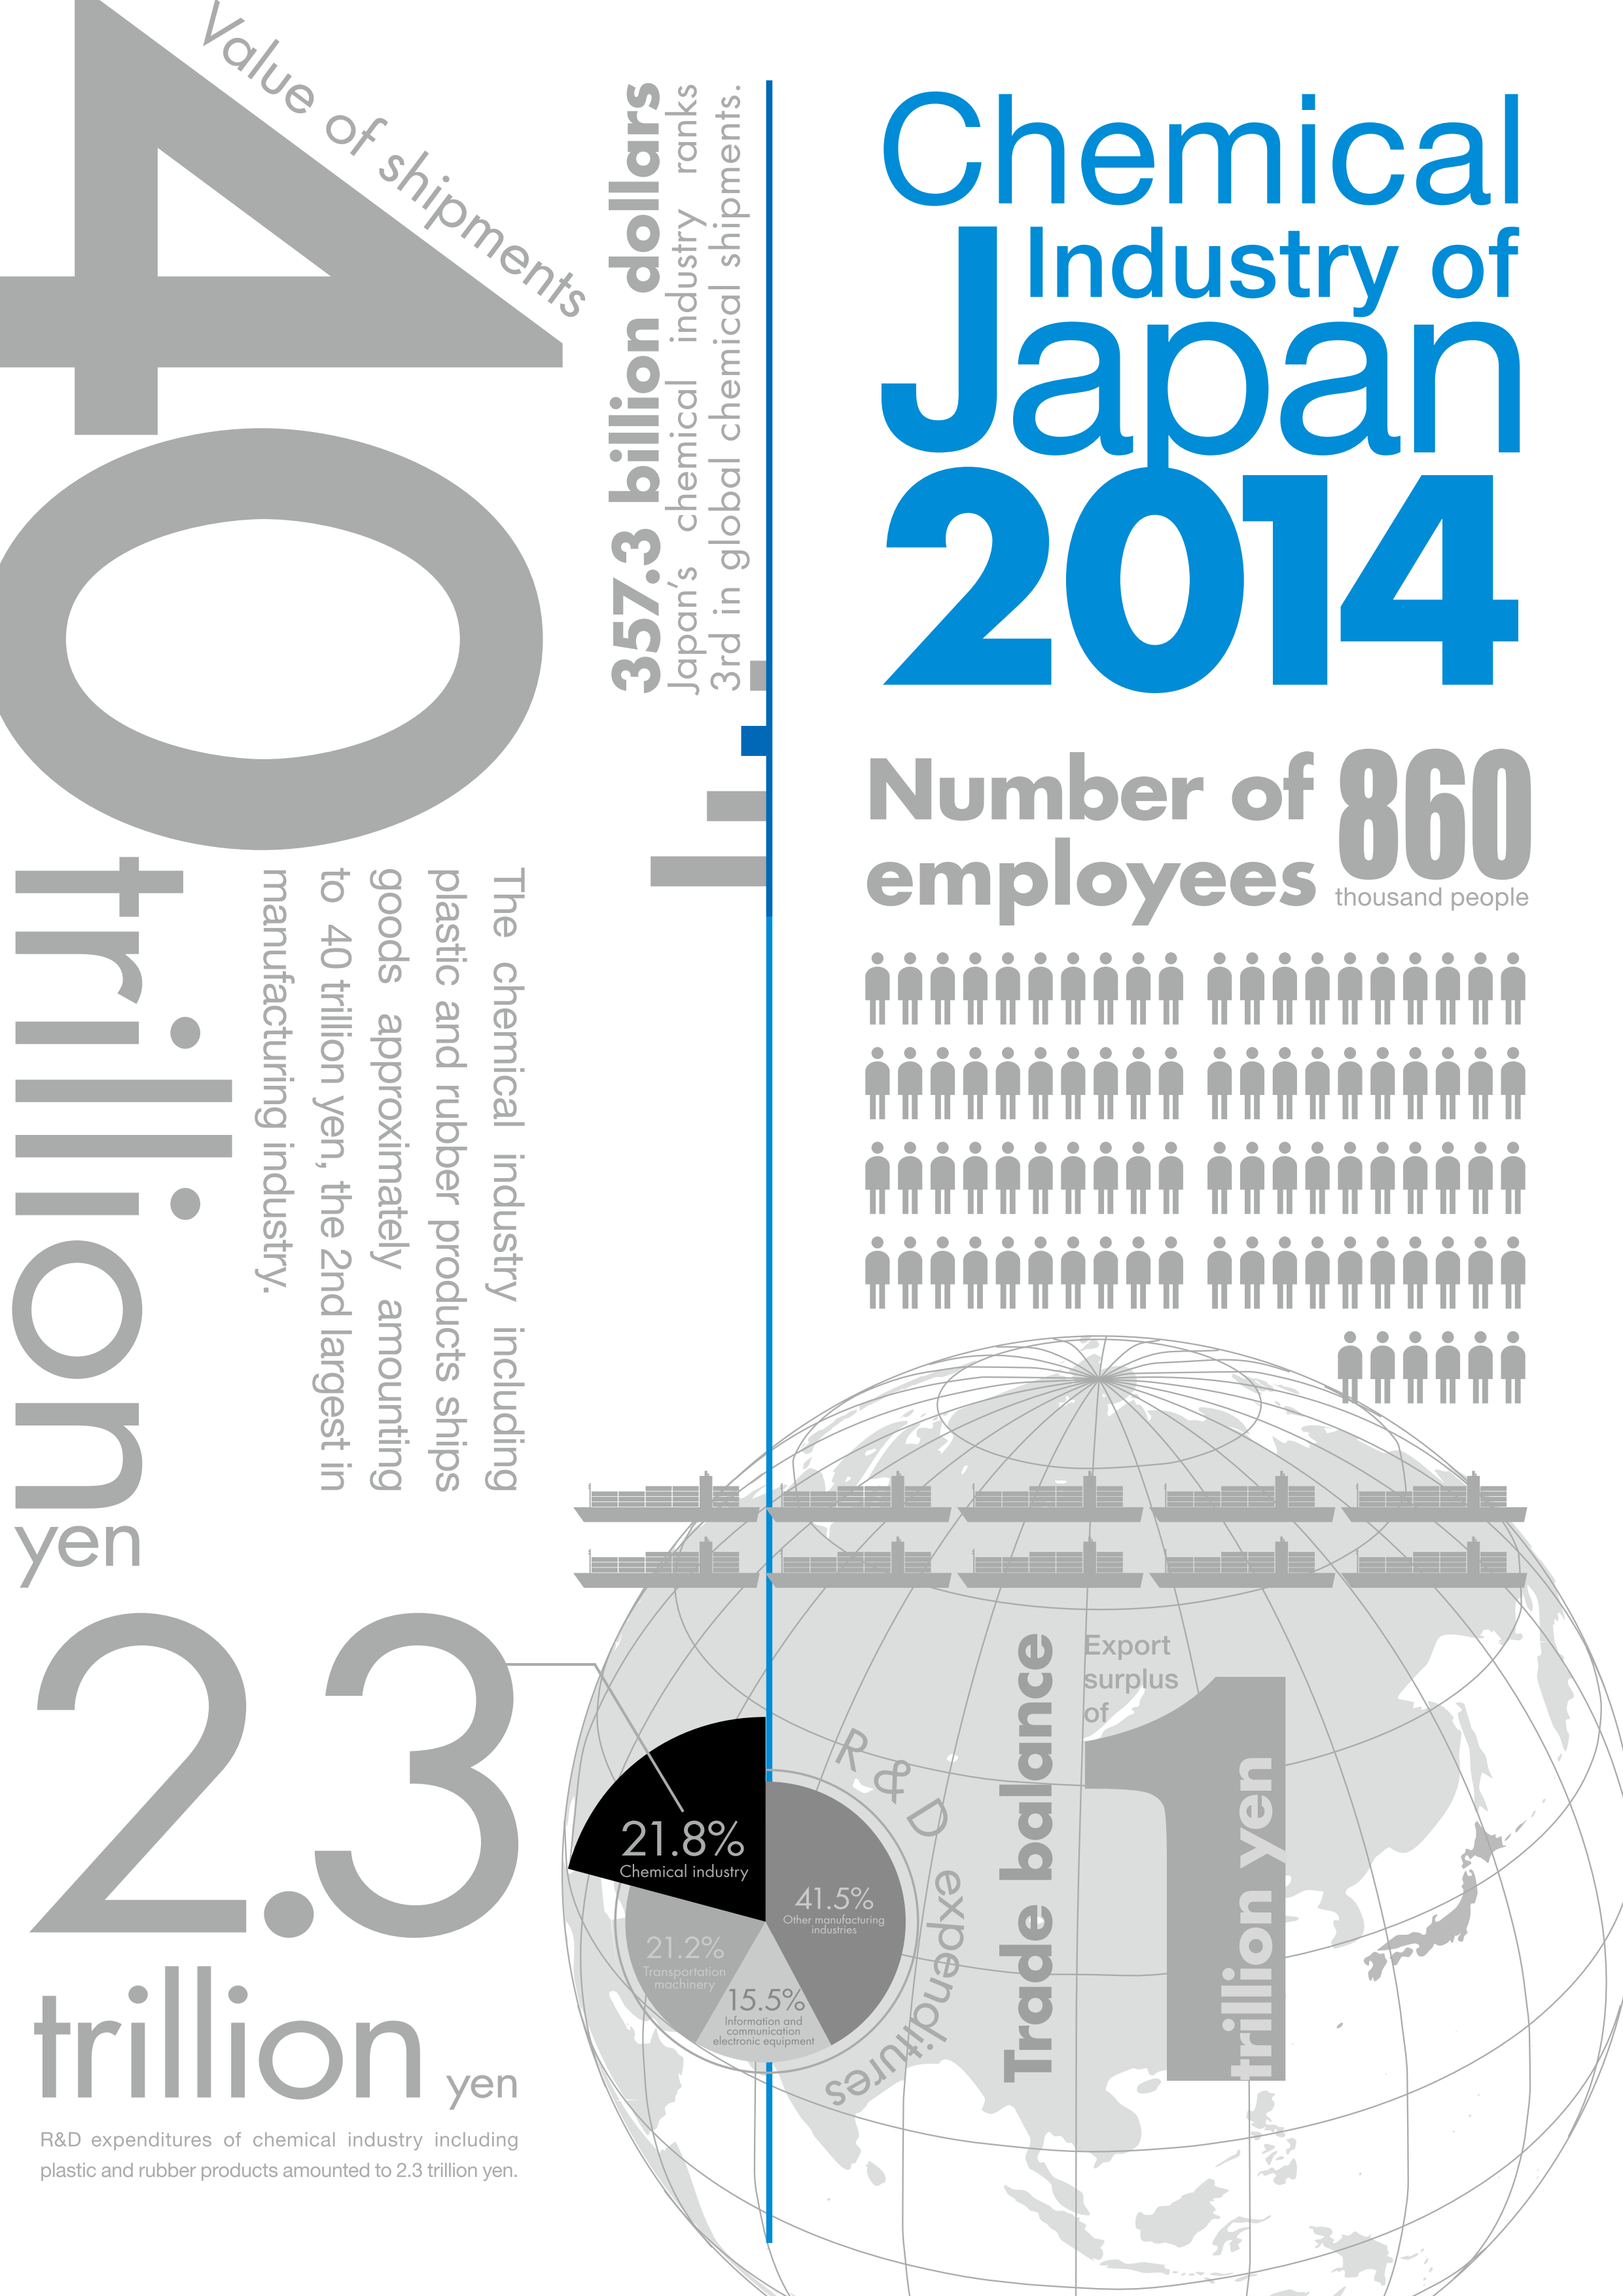 2014 CHEMICAL INDUSTRY OF JAPAN IN GRAPHS